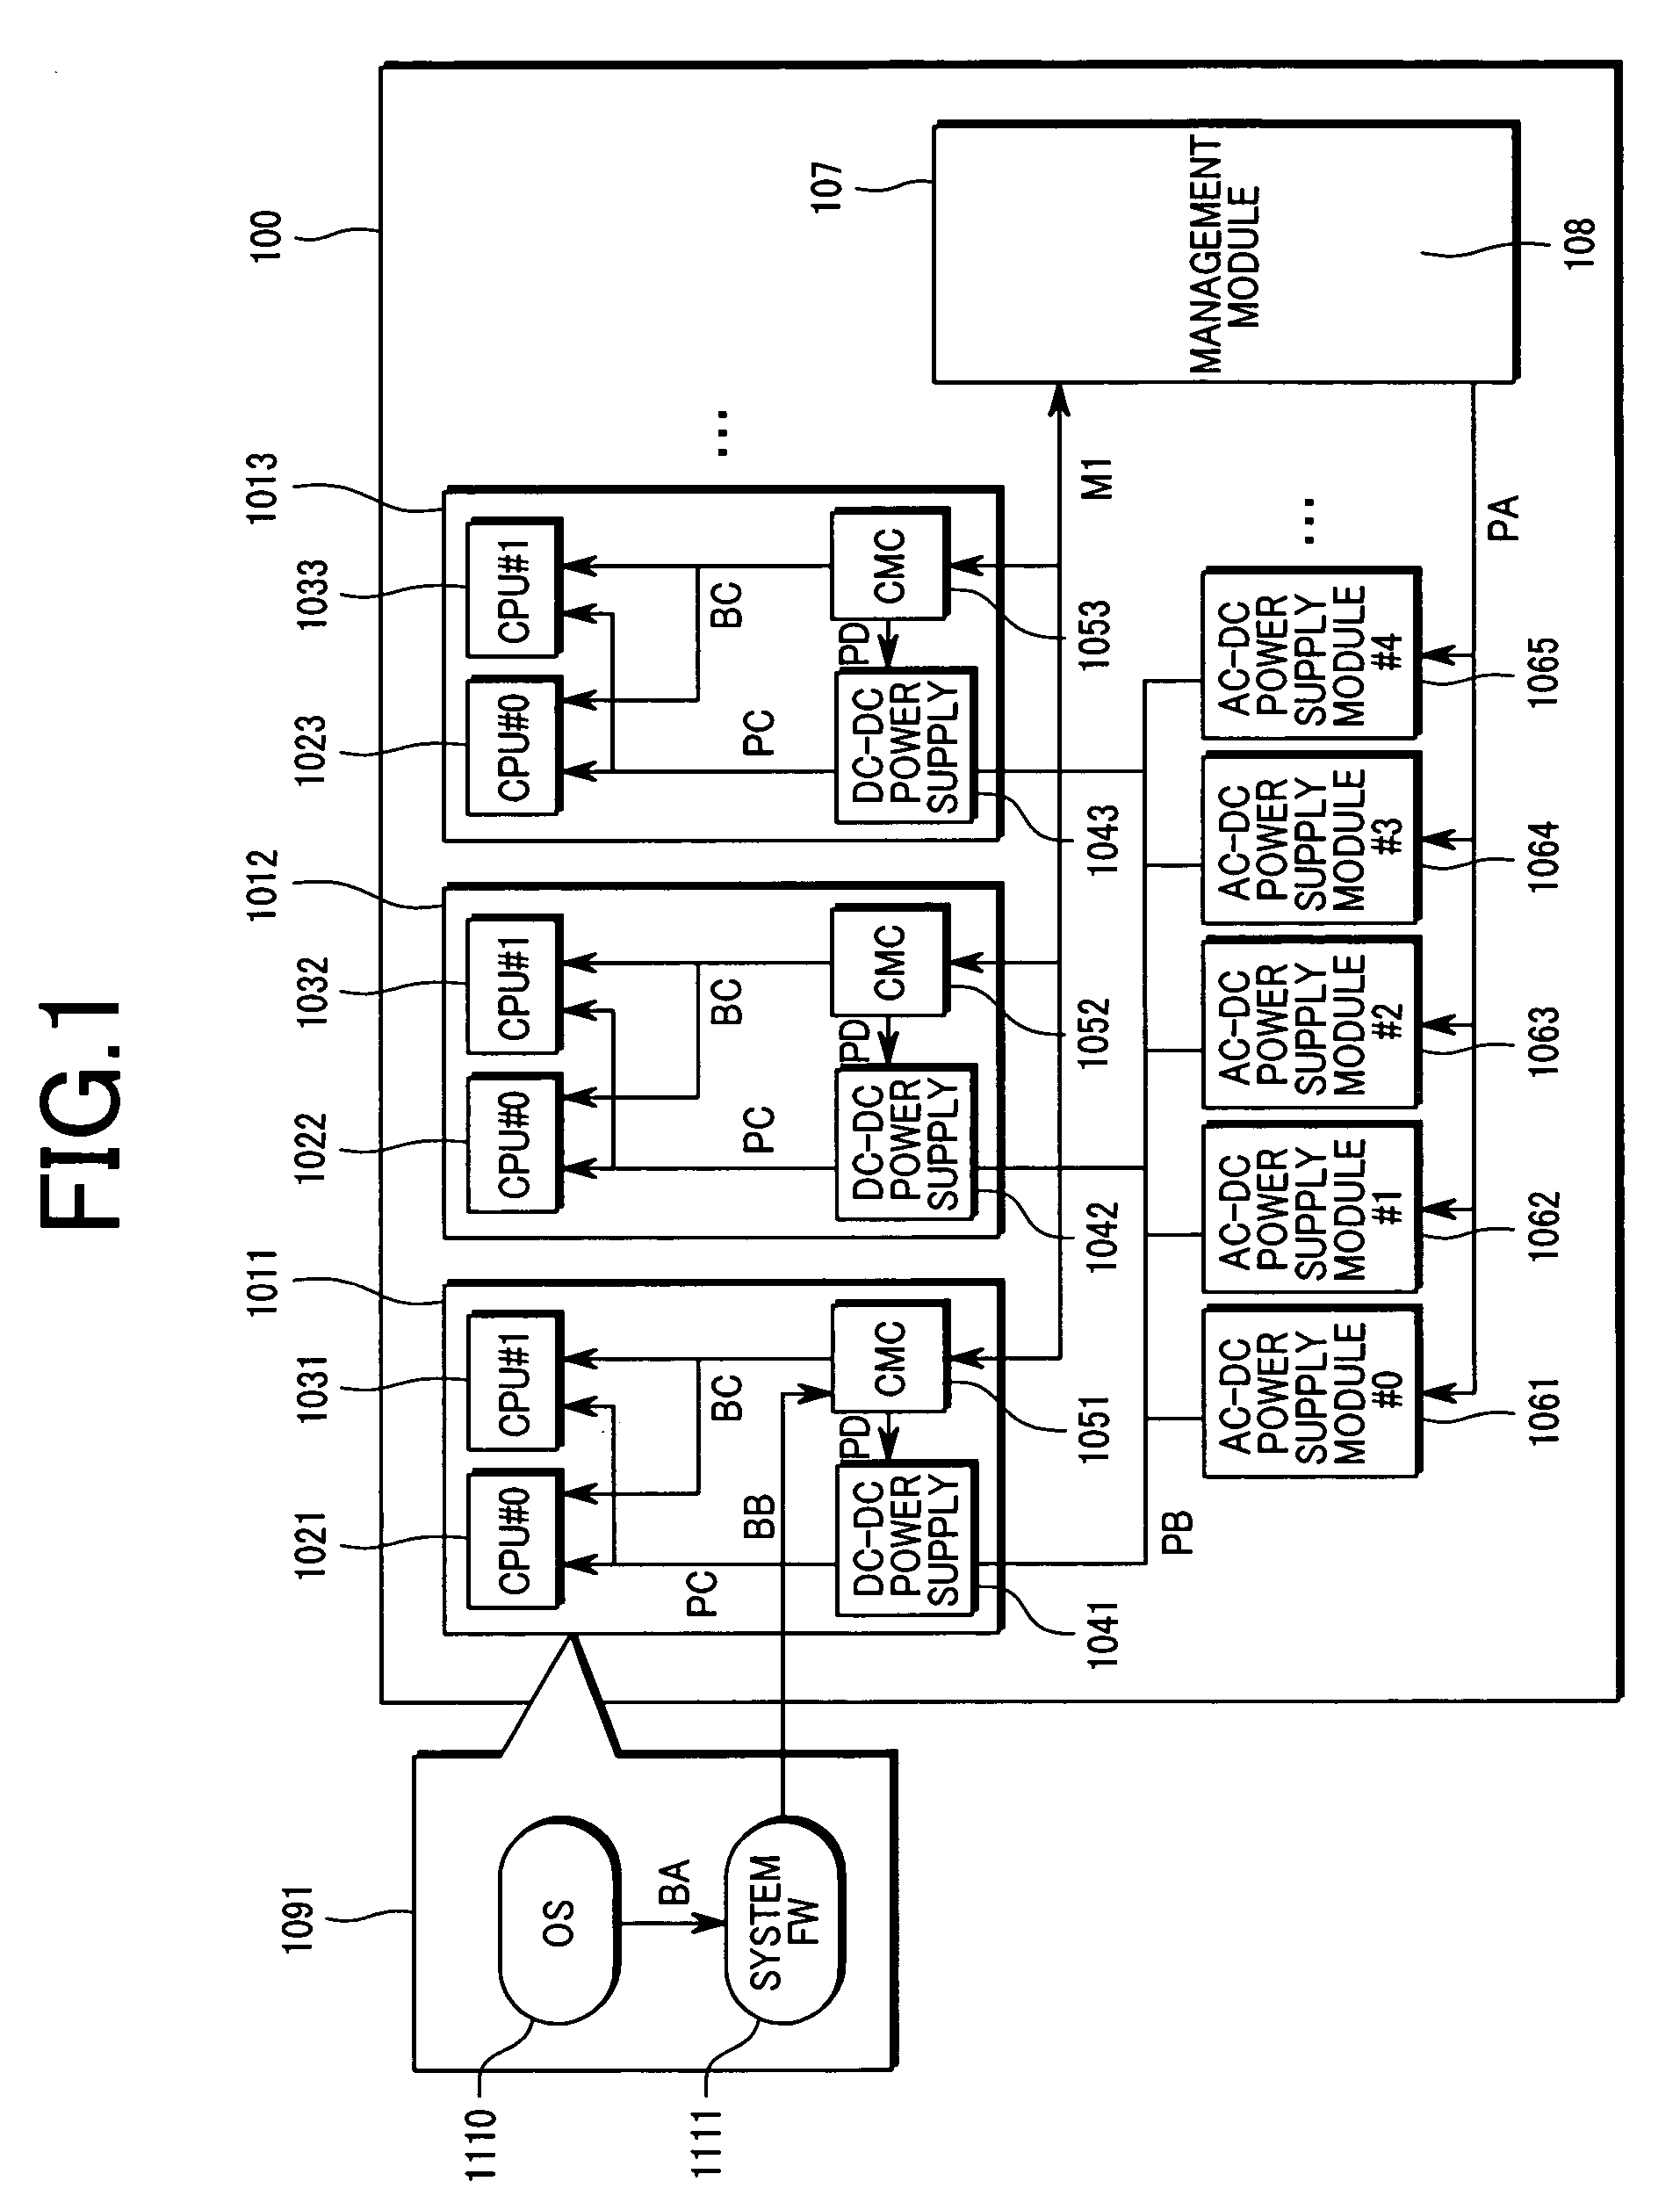 Multiple computer equipment and management method for determining number of AC-DC power modules to be operated by calculating power consumption based upon system information